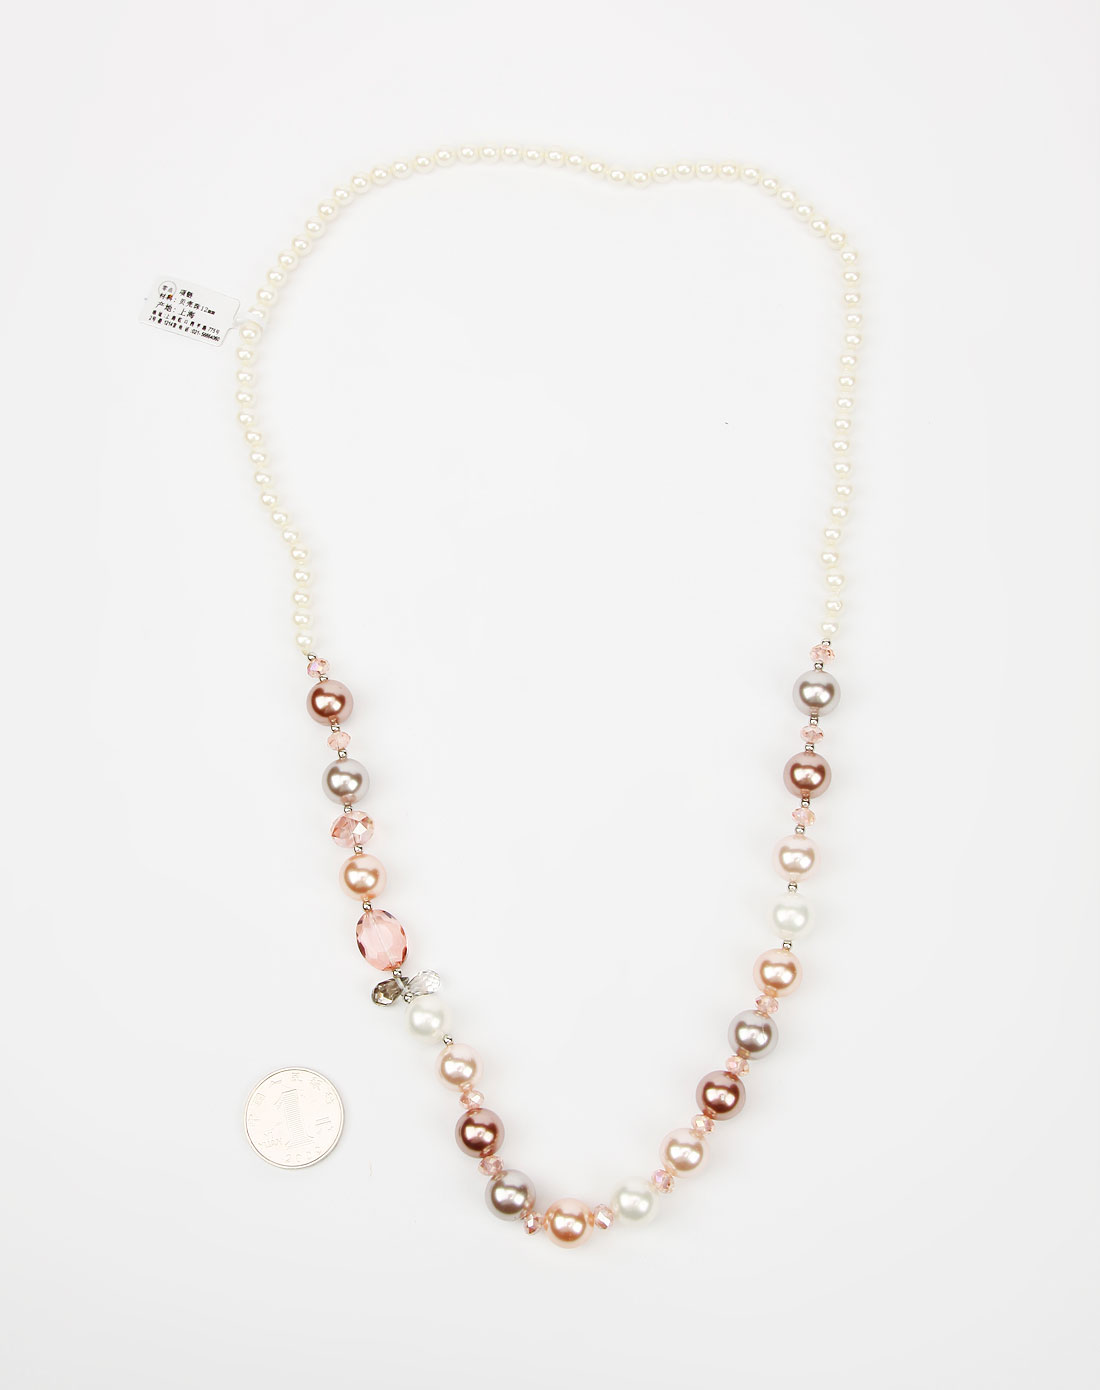 Pearl fancy fashion necklace